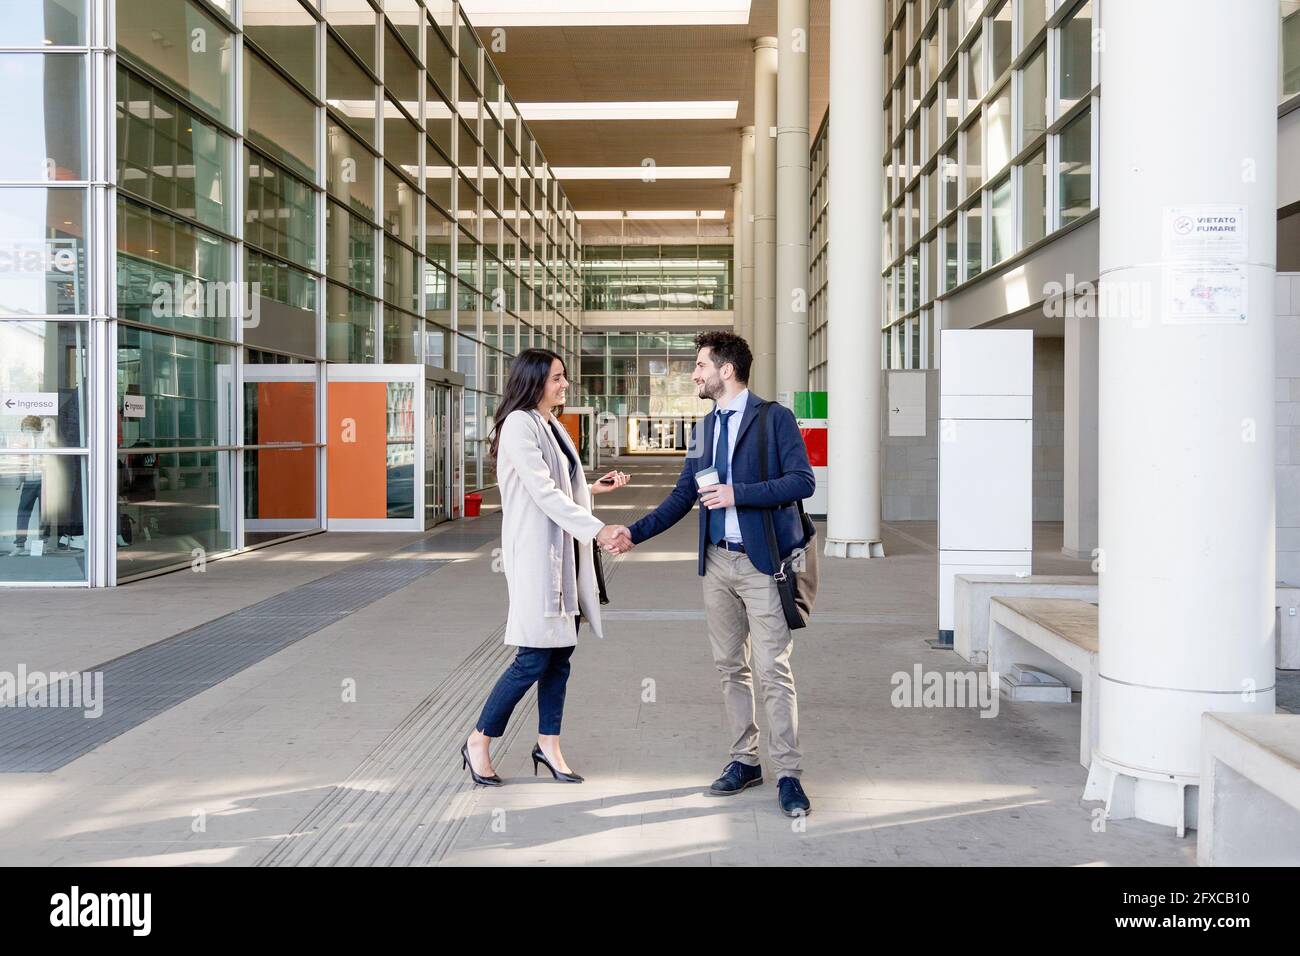 Business people greeting through handshake while standing on footpath Stock Photo